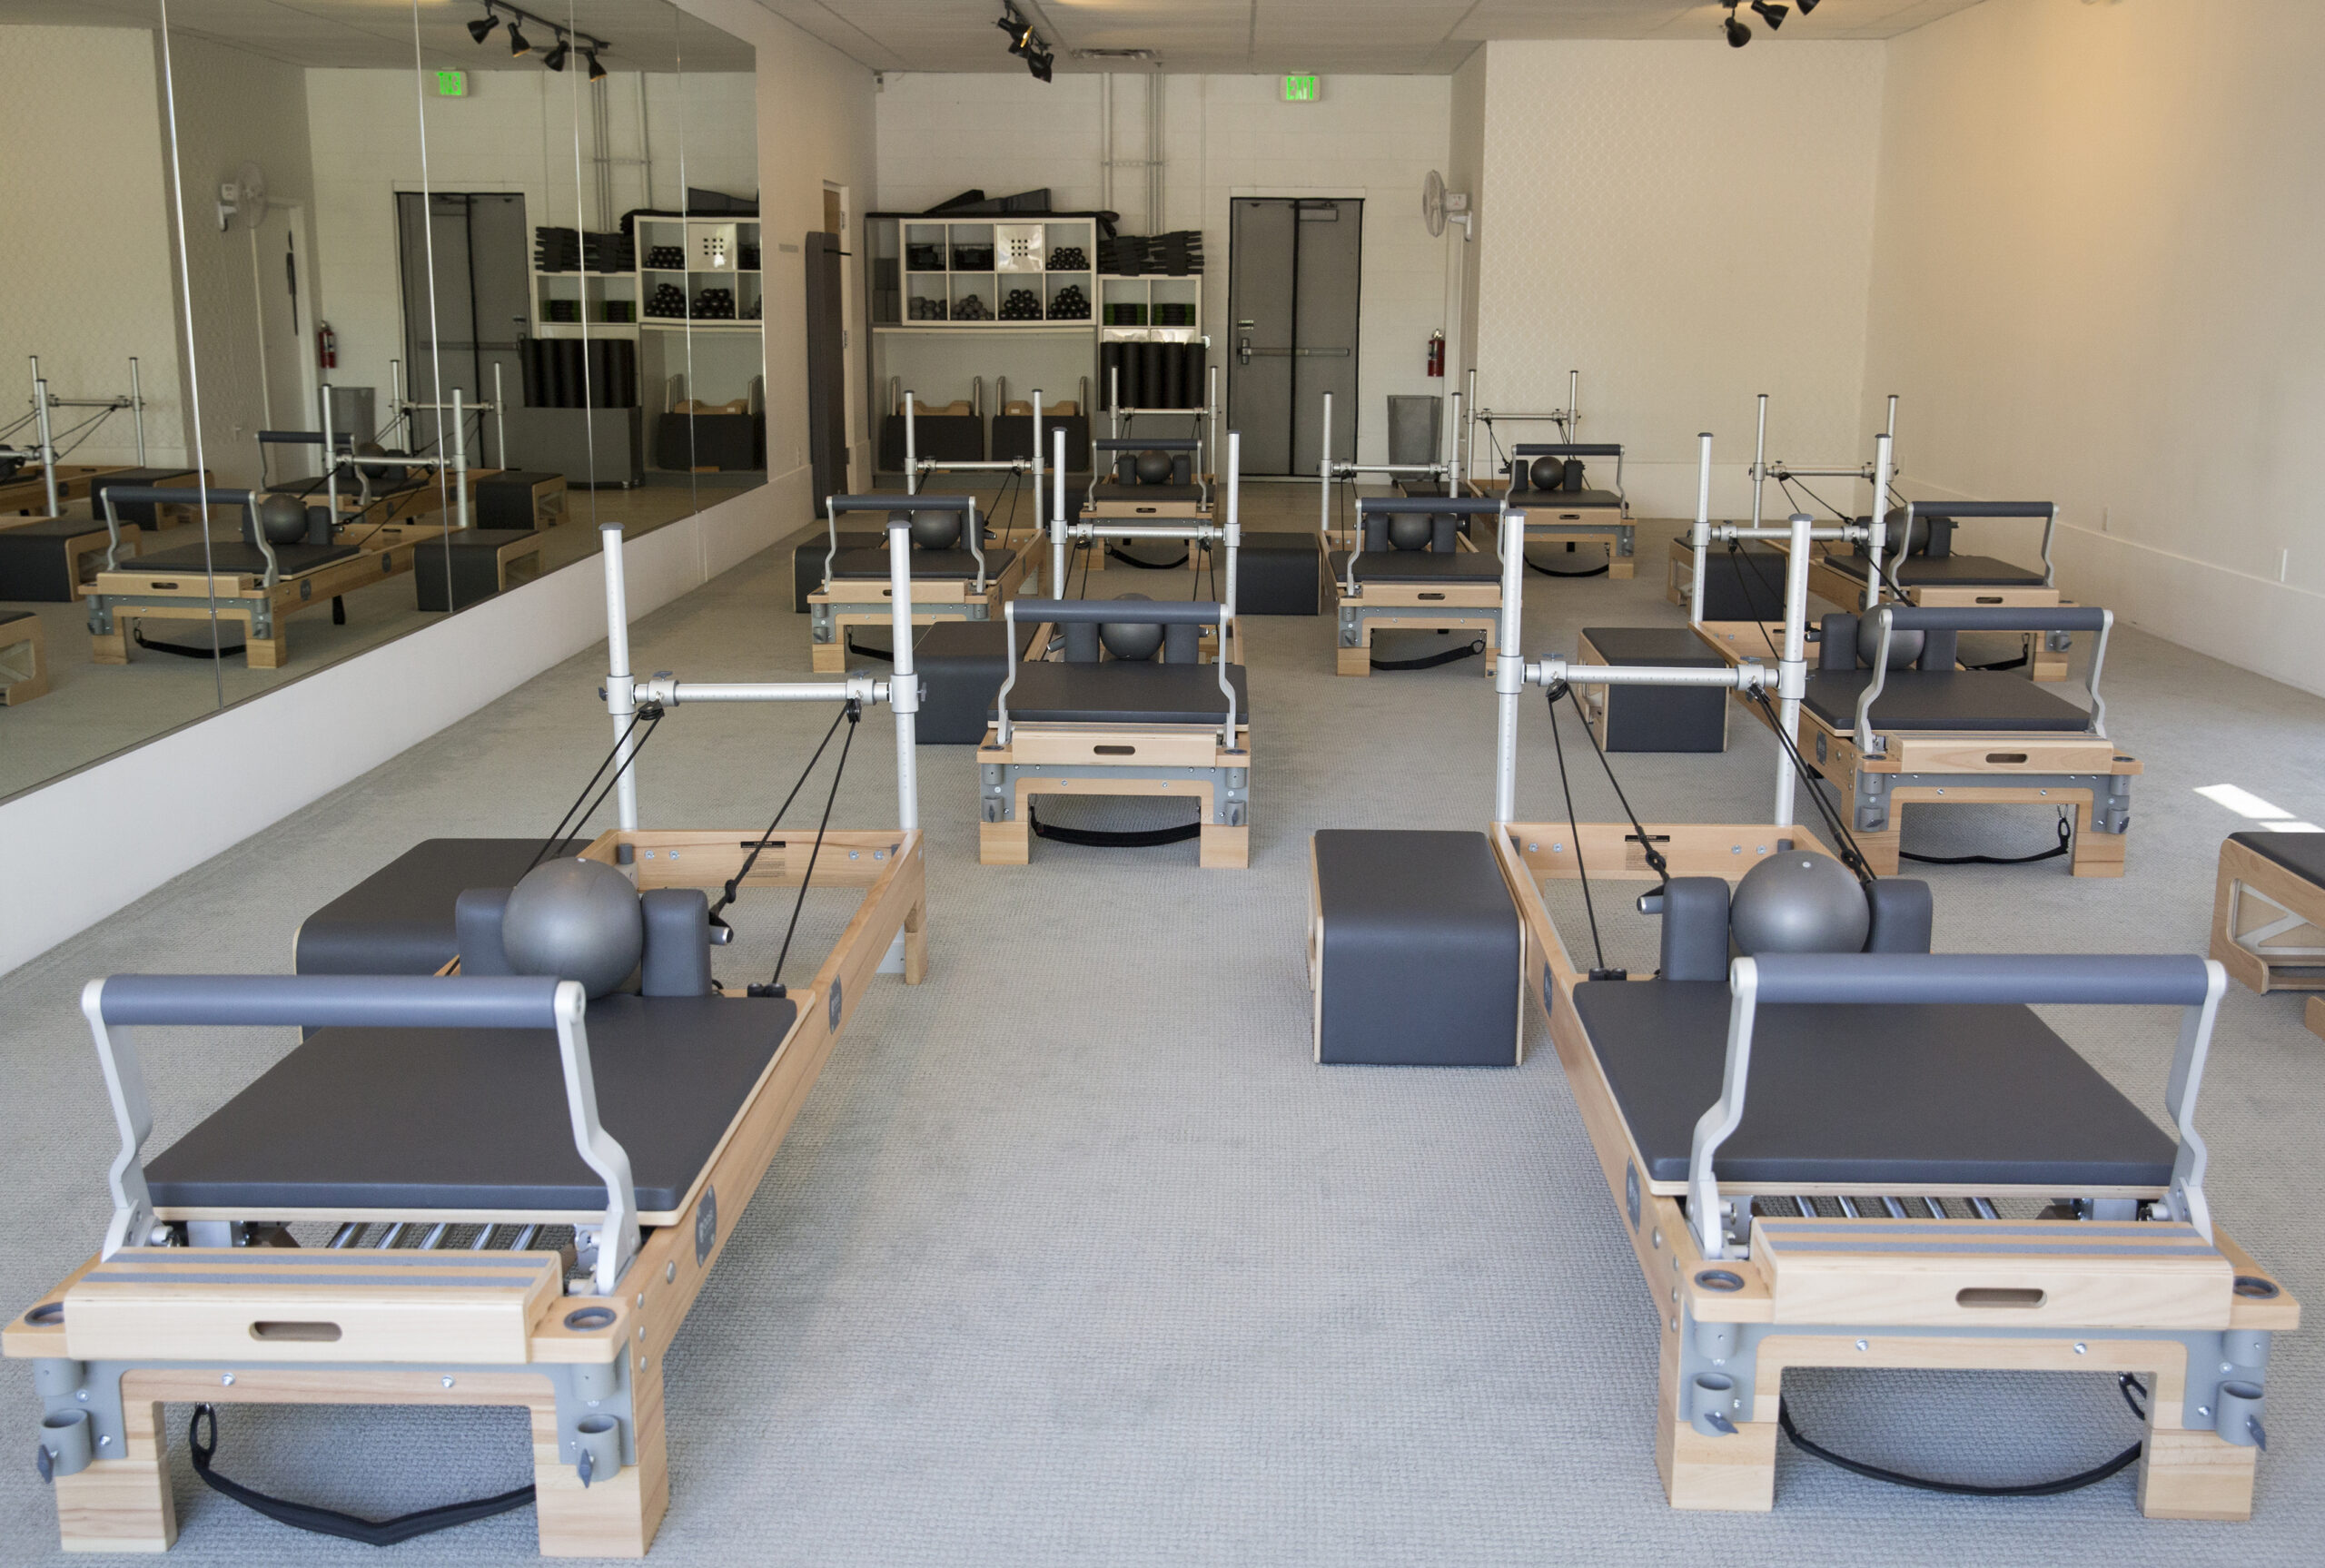 BASI Pilates Academy - NYC, formerly known as Physio Logic Pilates &  Movement: Read Reviews and Book Classes on ClassPass